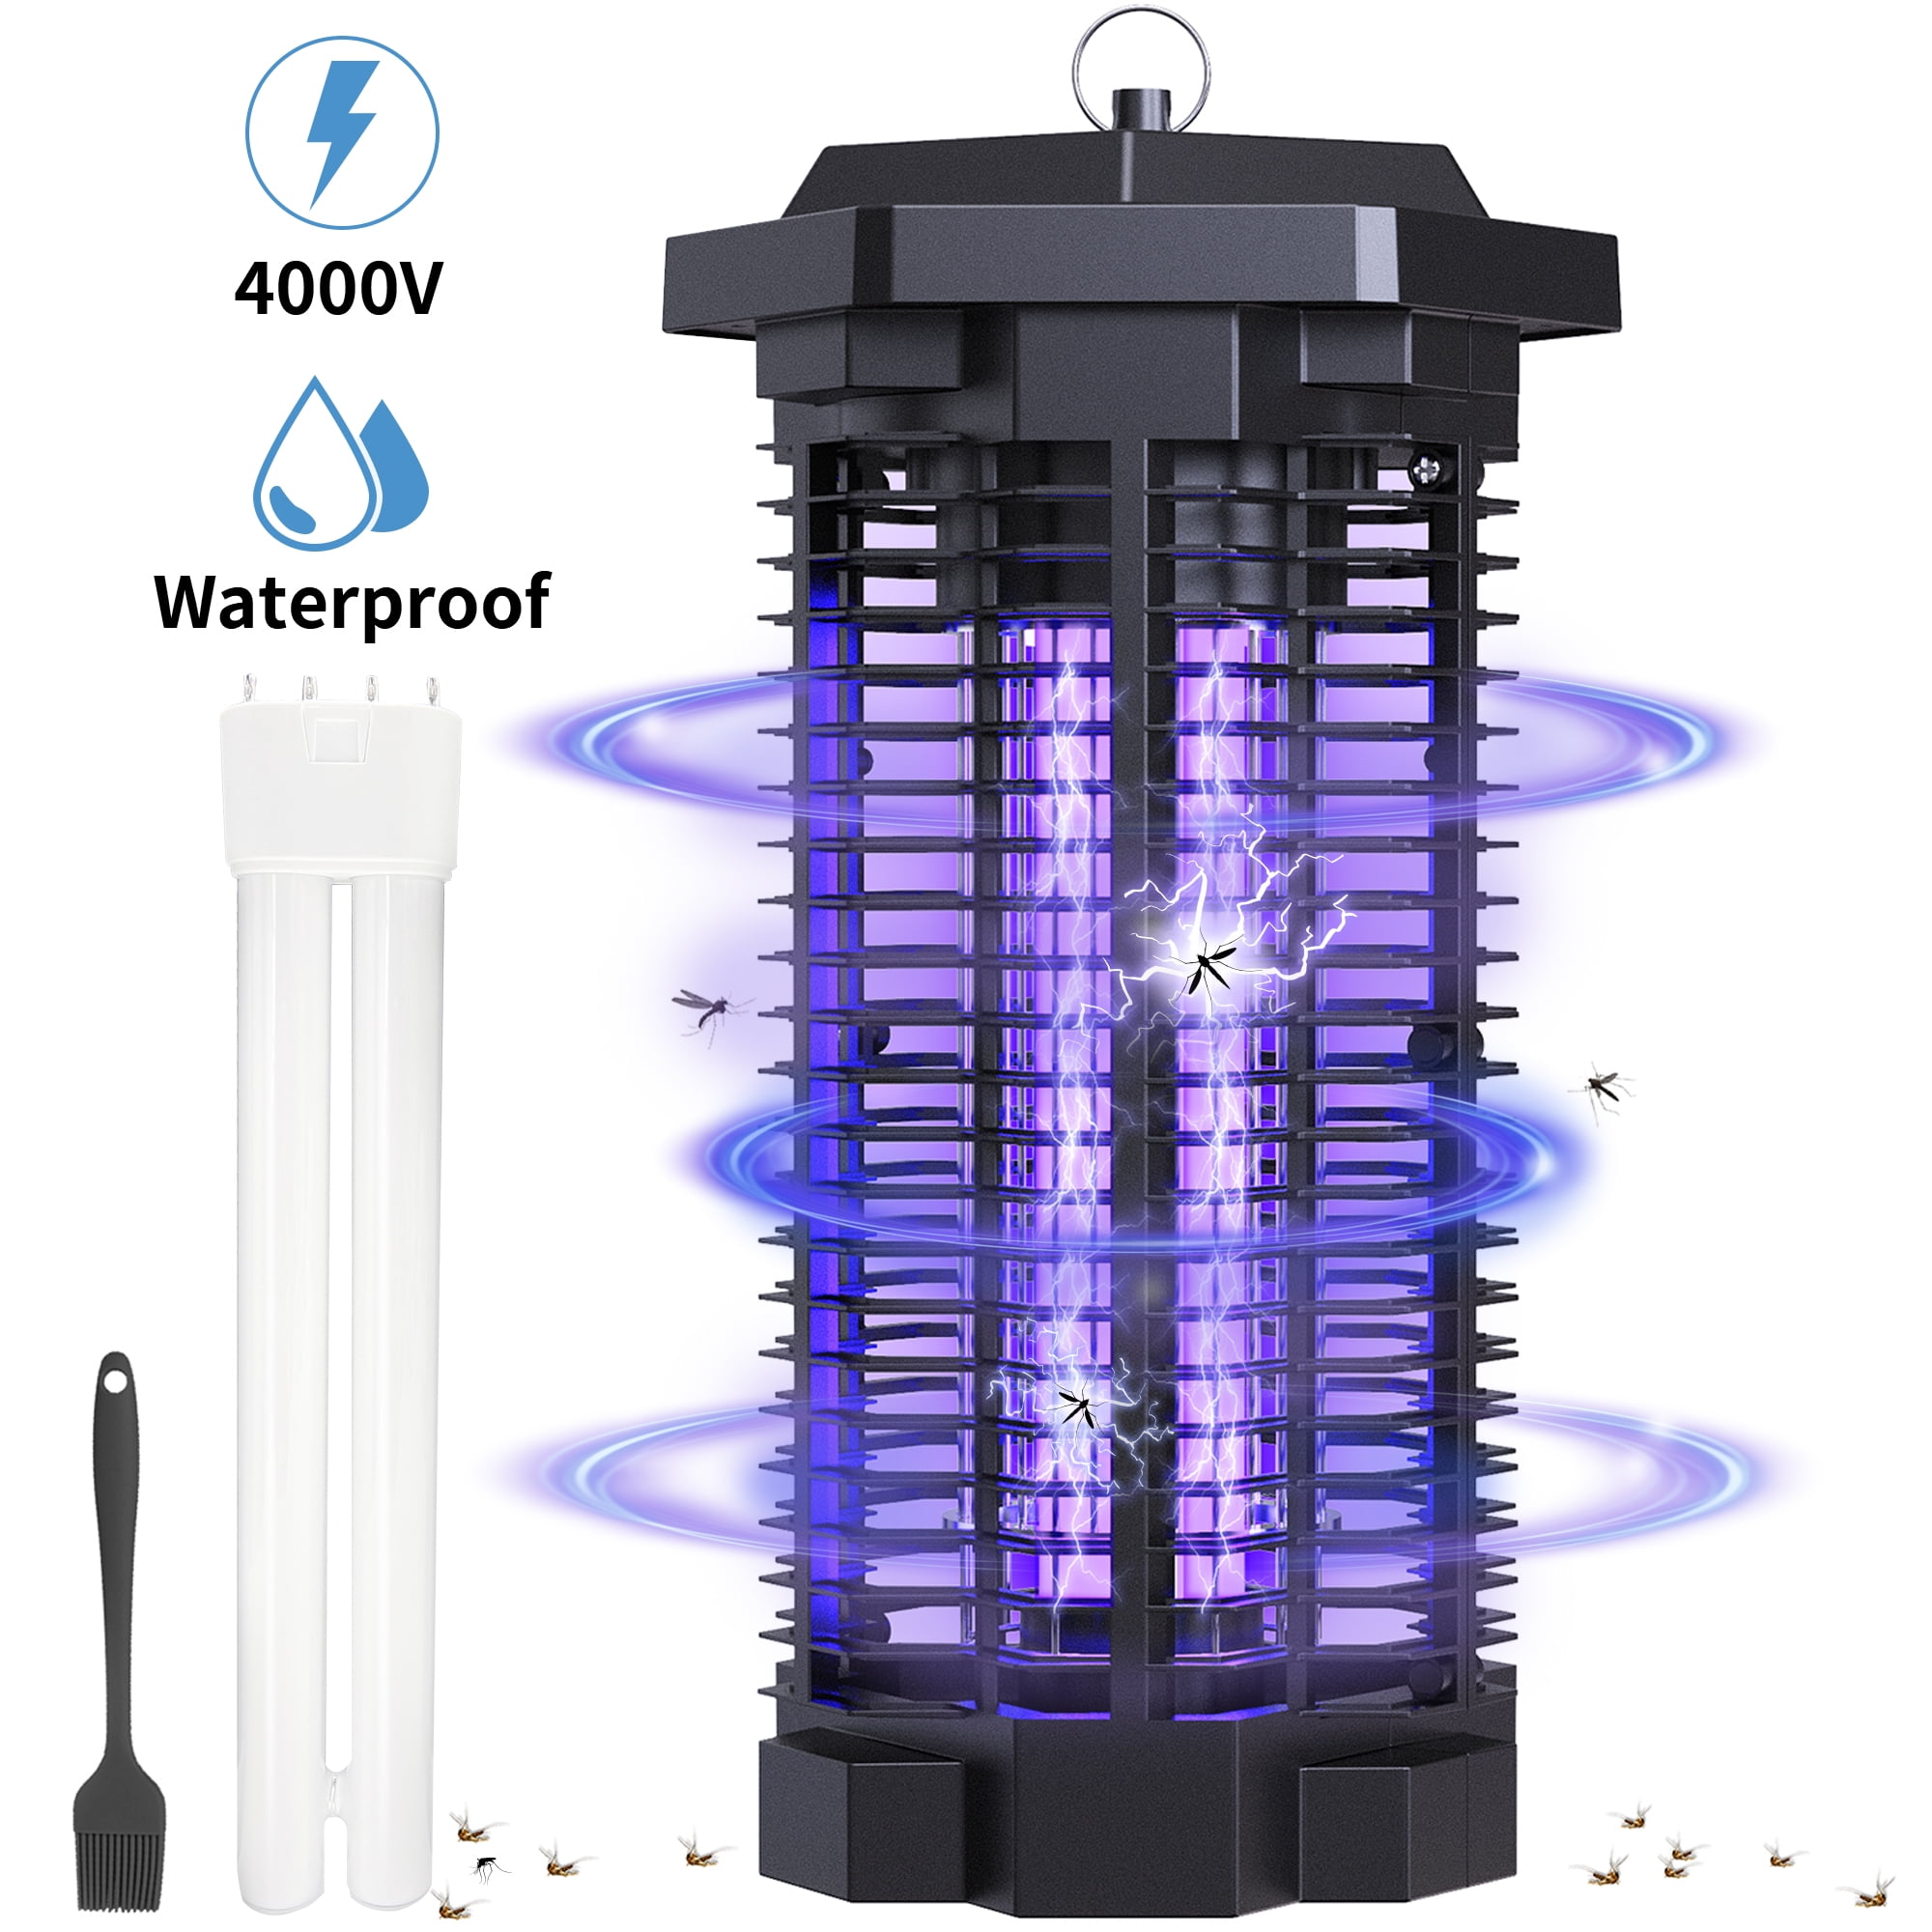  Bug Zapper with Light Sensor, Mosquito Zapper Outdoor 18W  Electric Insect Killer, Waterproof Mosquito Killer, Mosquito Repellent  Outdoor, Fly Trap for Home Garden Patio, Outdoor Mosquito Control : Patio,  Lawn